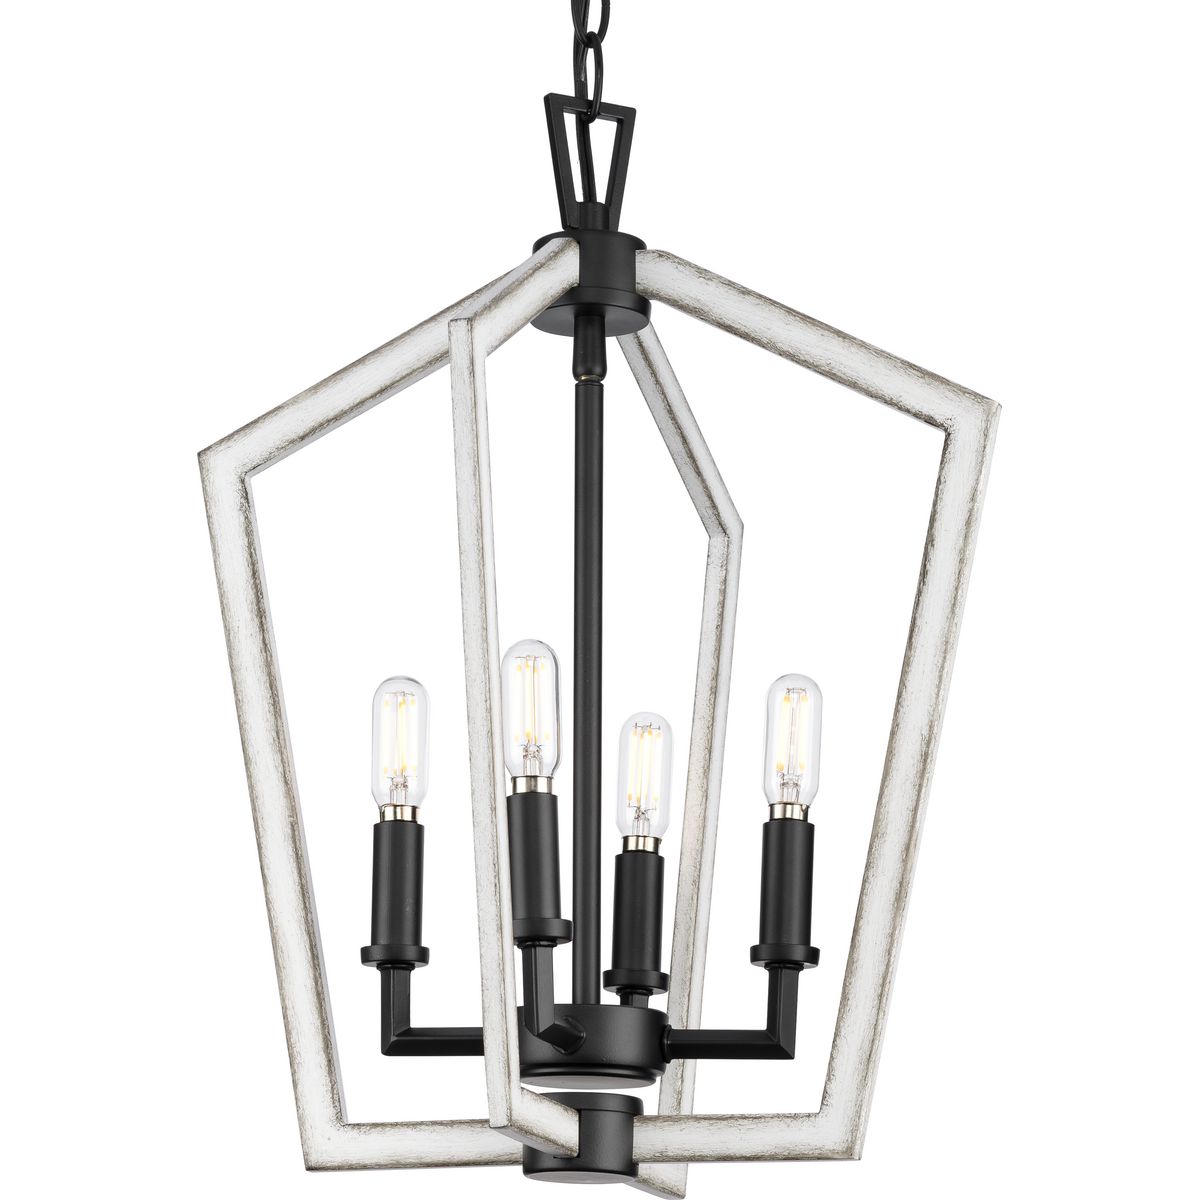 PROGRESS LIGHTING P500377-31M Matte Black Galloway Collection Four-Light 18" Matte Black Modern Farmhouse Chandelier with Distressed White Accents